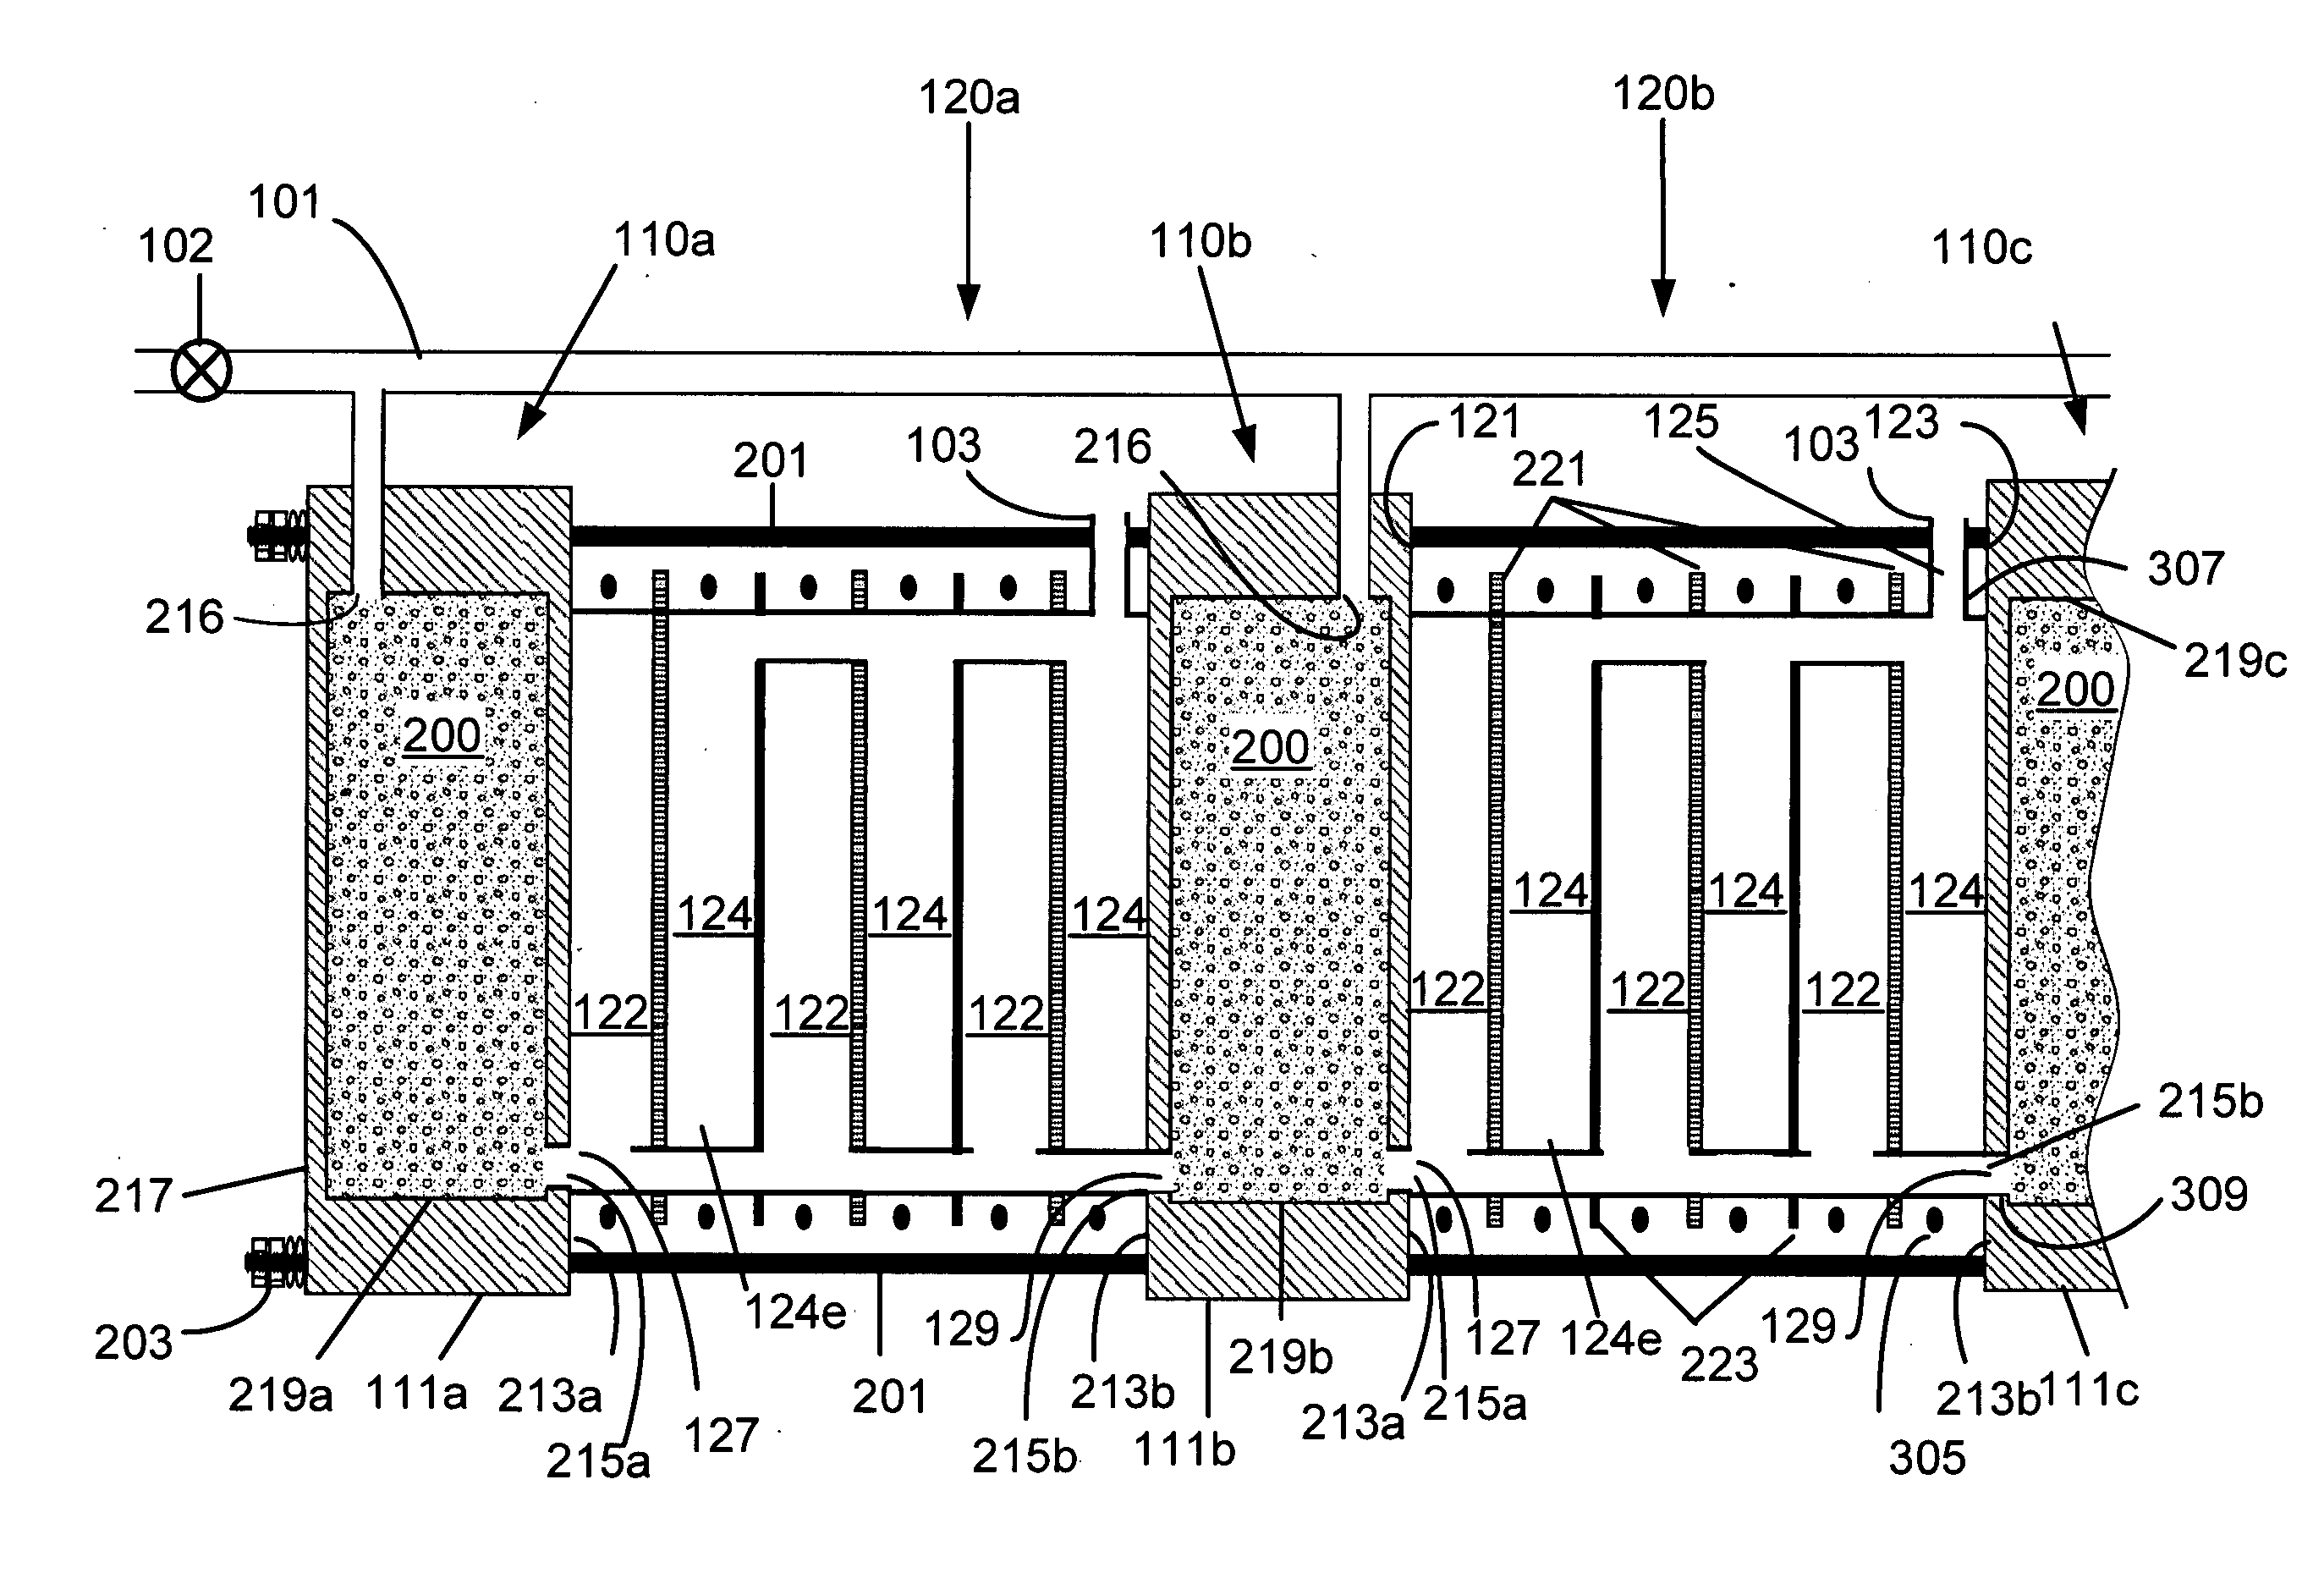 Hydrogen storage and integrated fuel cell assembly